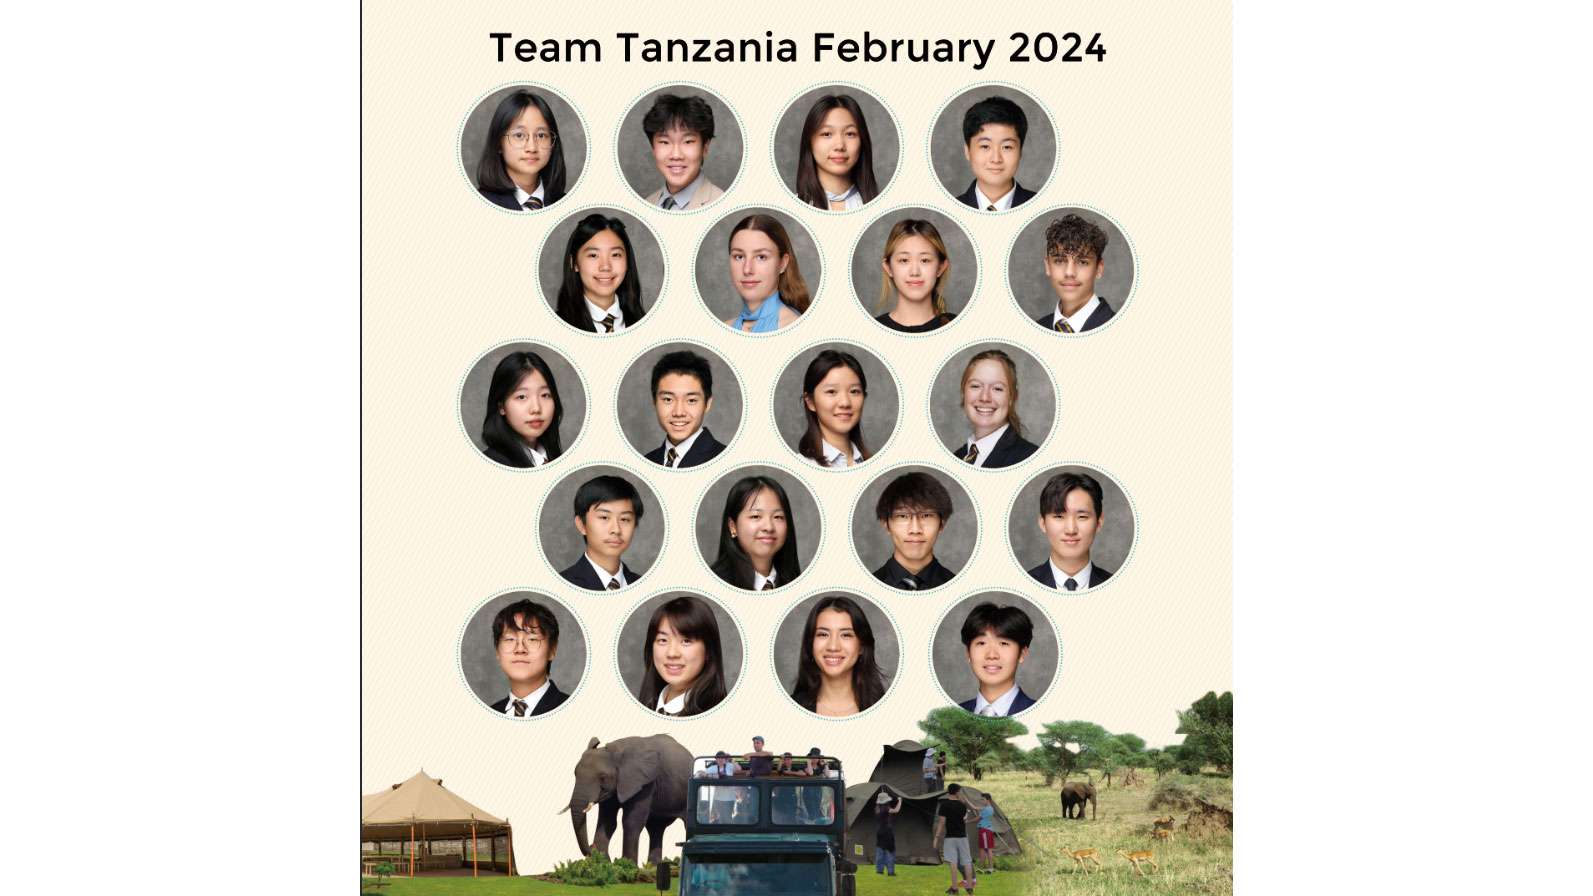 Life Changing Experiences in Tanzania 2024 - Life Changing Experiences in Tanzania 2024